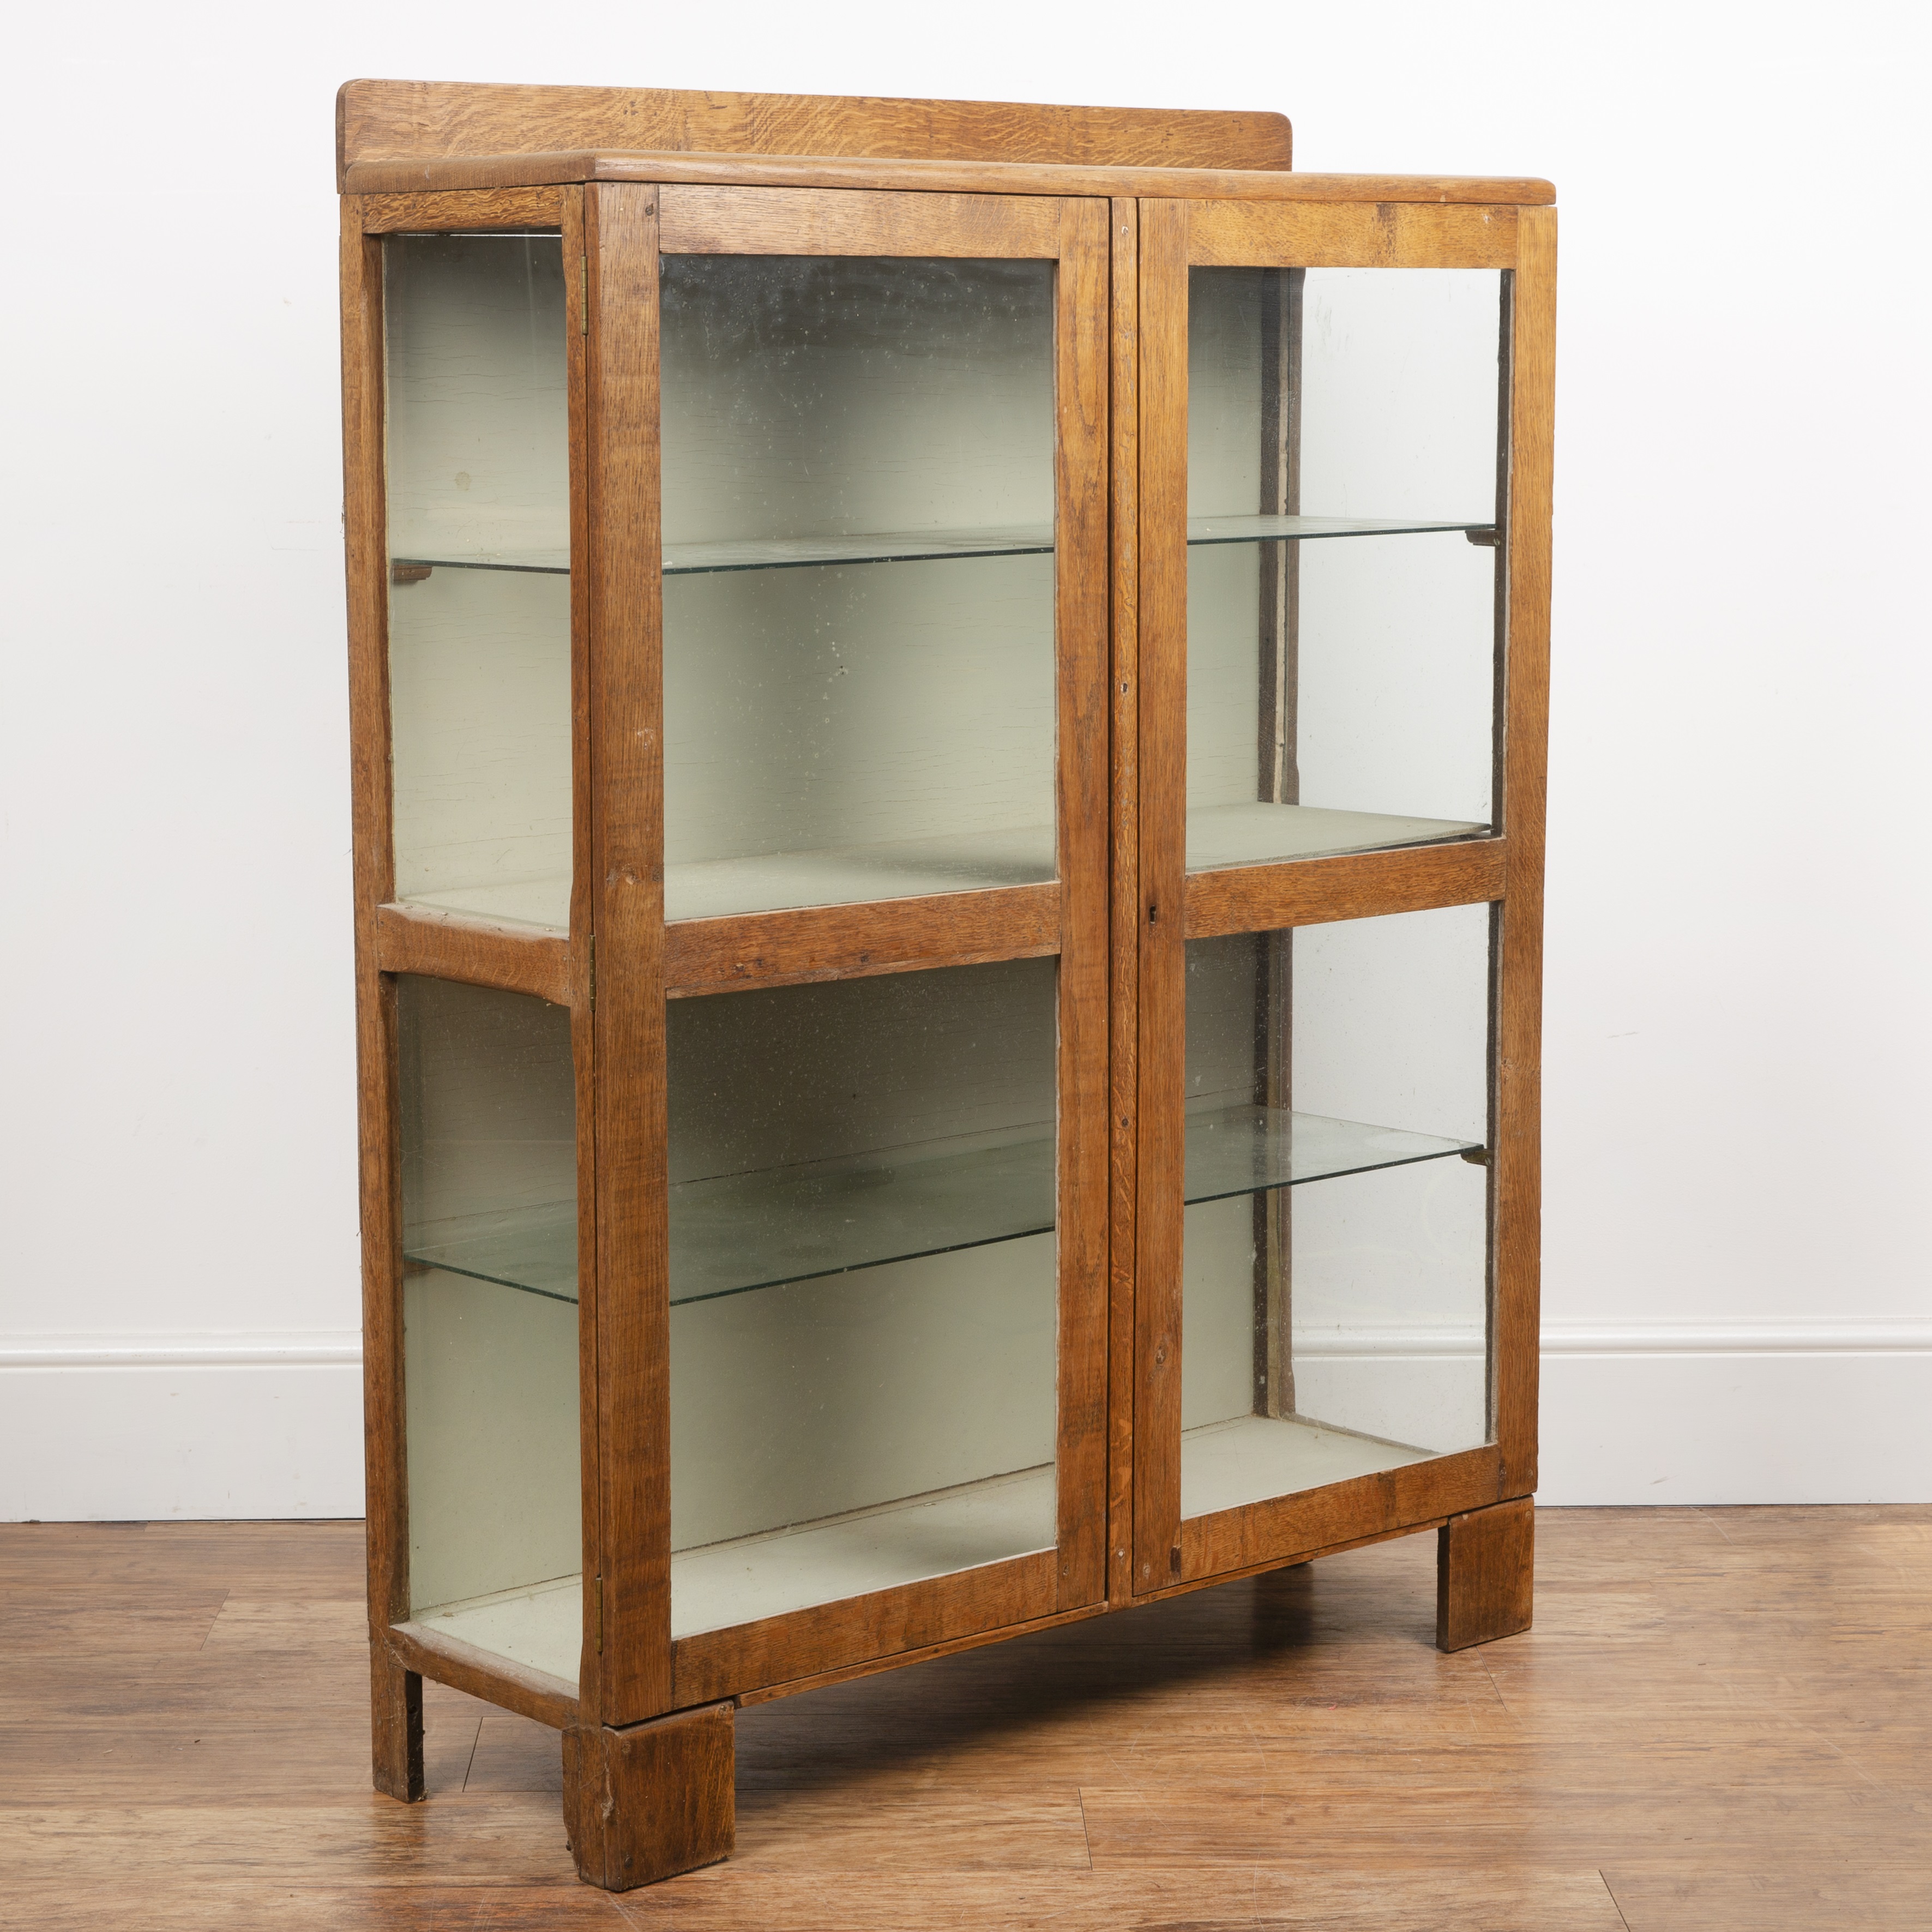 Cotswold School oak, glazed bookcase or cabinet, with galleried back above panelled doors, 95cm wide - Image 3 of 5